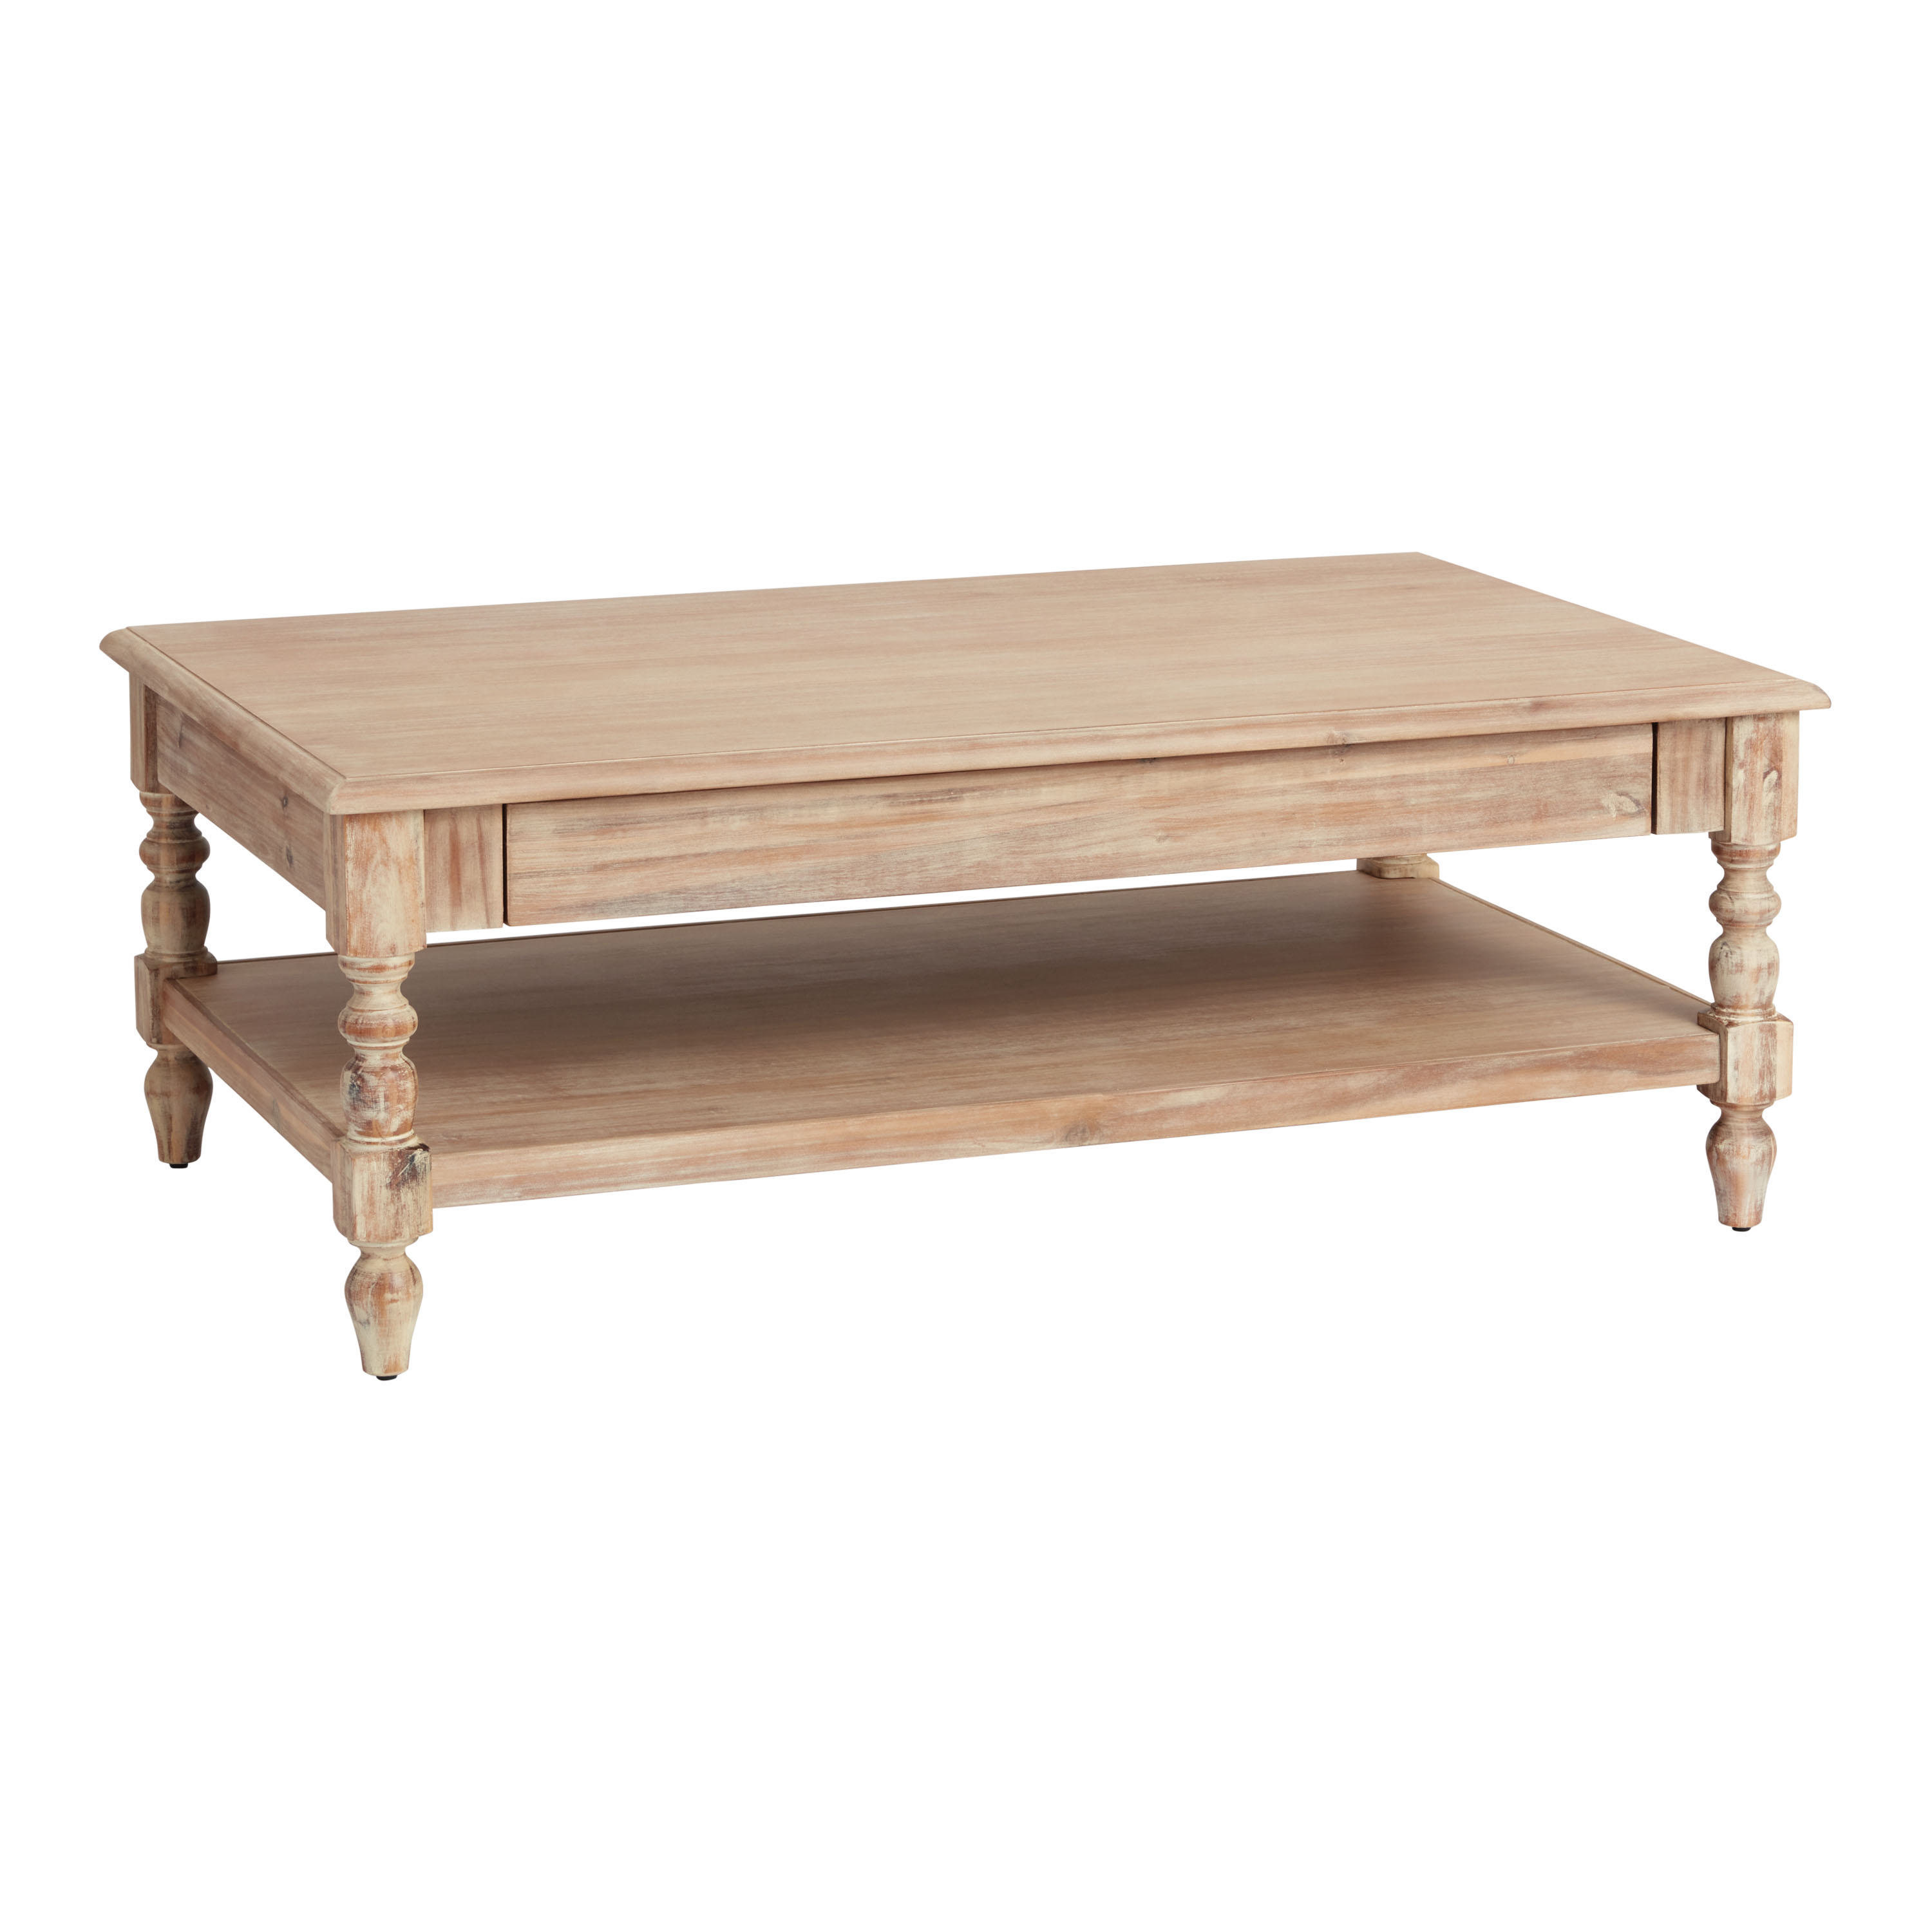 Everett Weathered Natural Wood Coffee Table - World Market